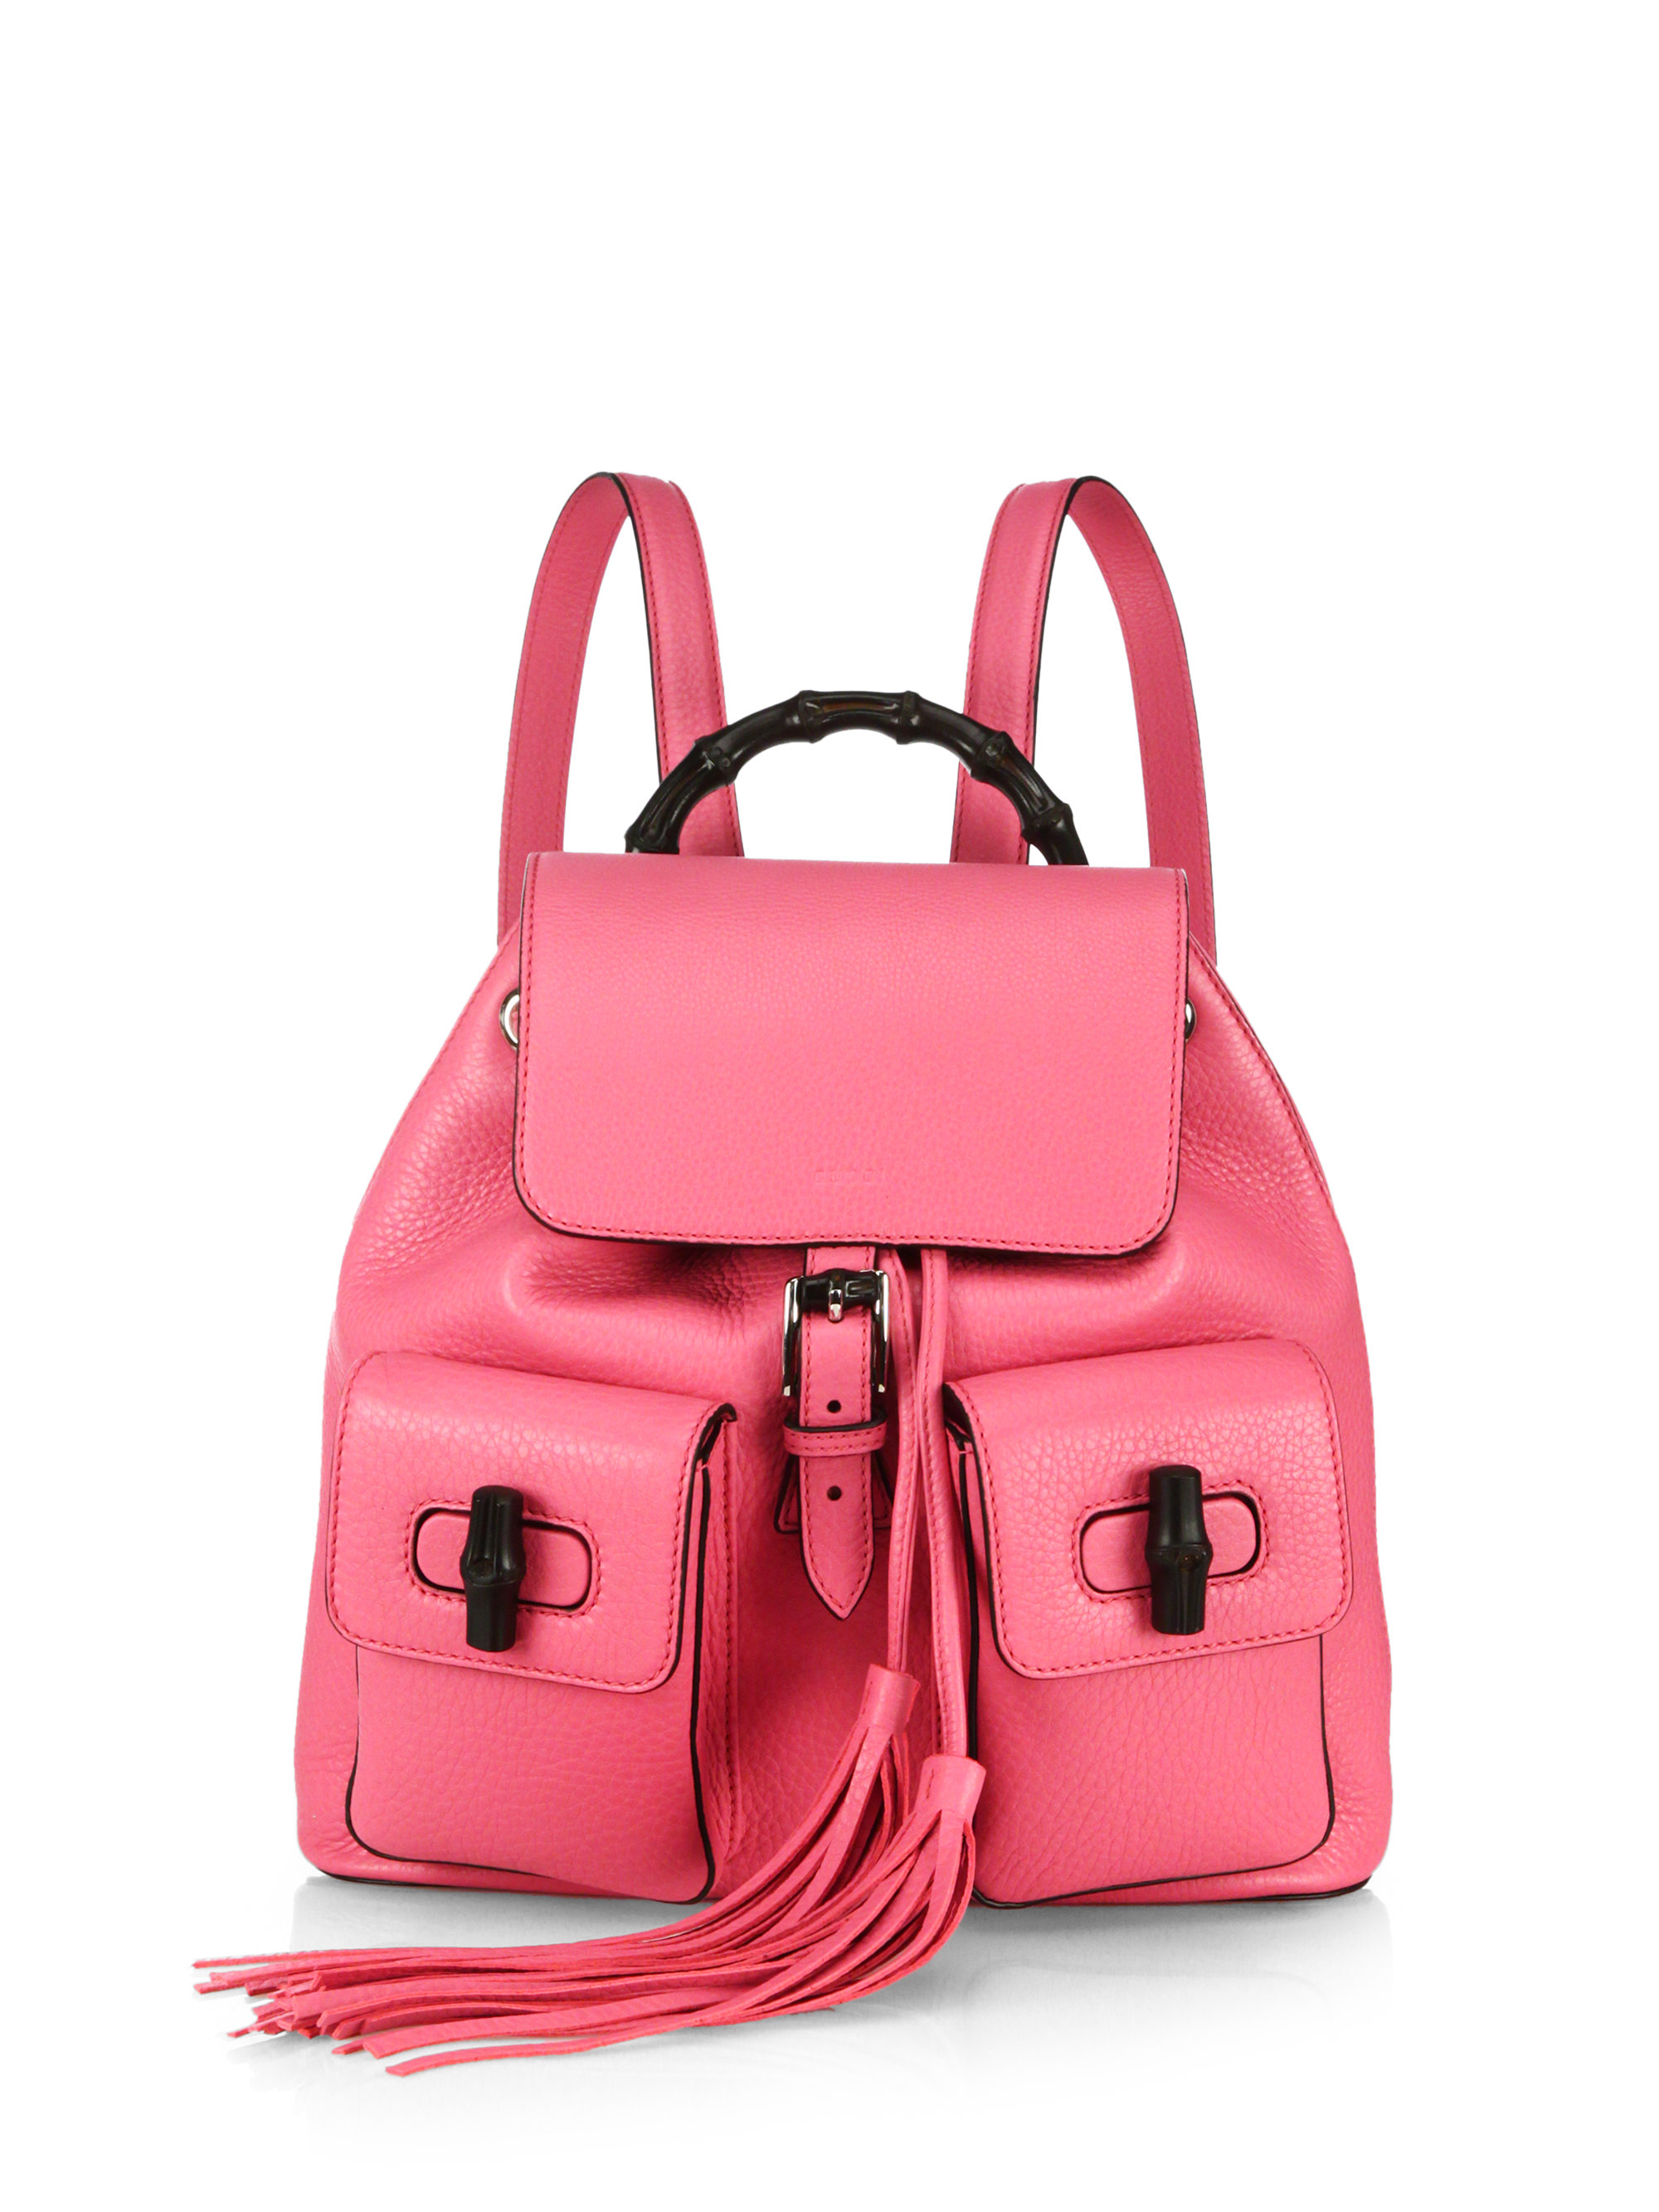 Lyst - Gucci Bamboo Sac Leather Backpack in Pink for Men